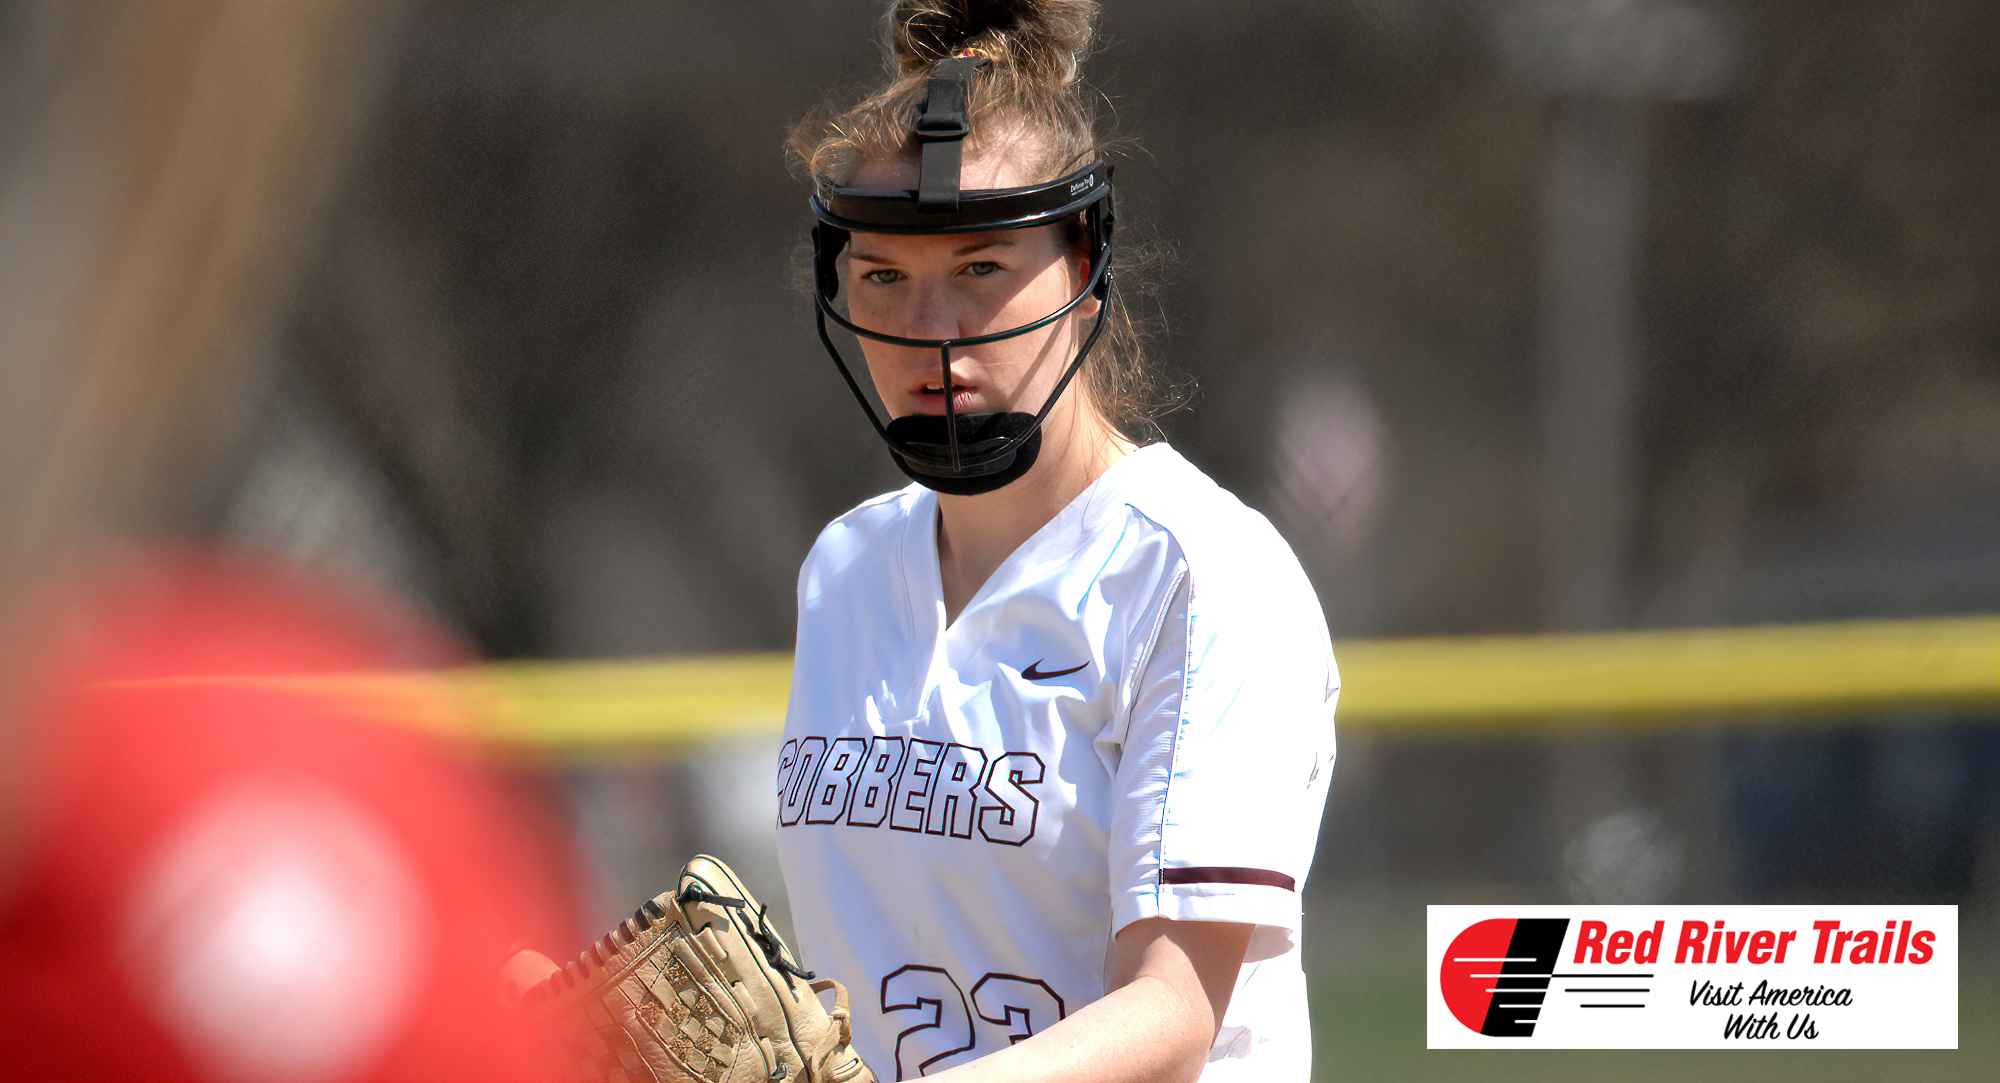 Senior Megan Gavin struck out 12 hitters in Game 1 of the Cobbers' DH at Bethany Lutheran and became only the fourth pitcher in school history to reach the 300-strikeout milestone in a career. (Pic taken in 2019)